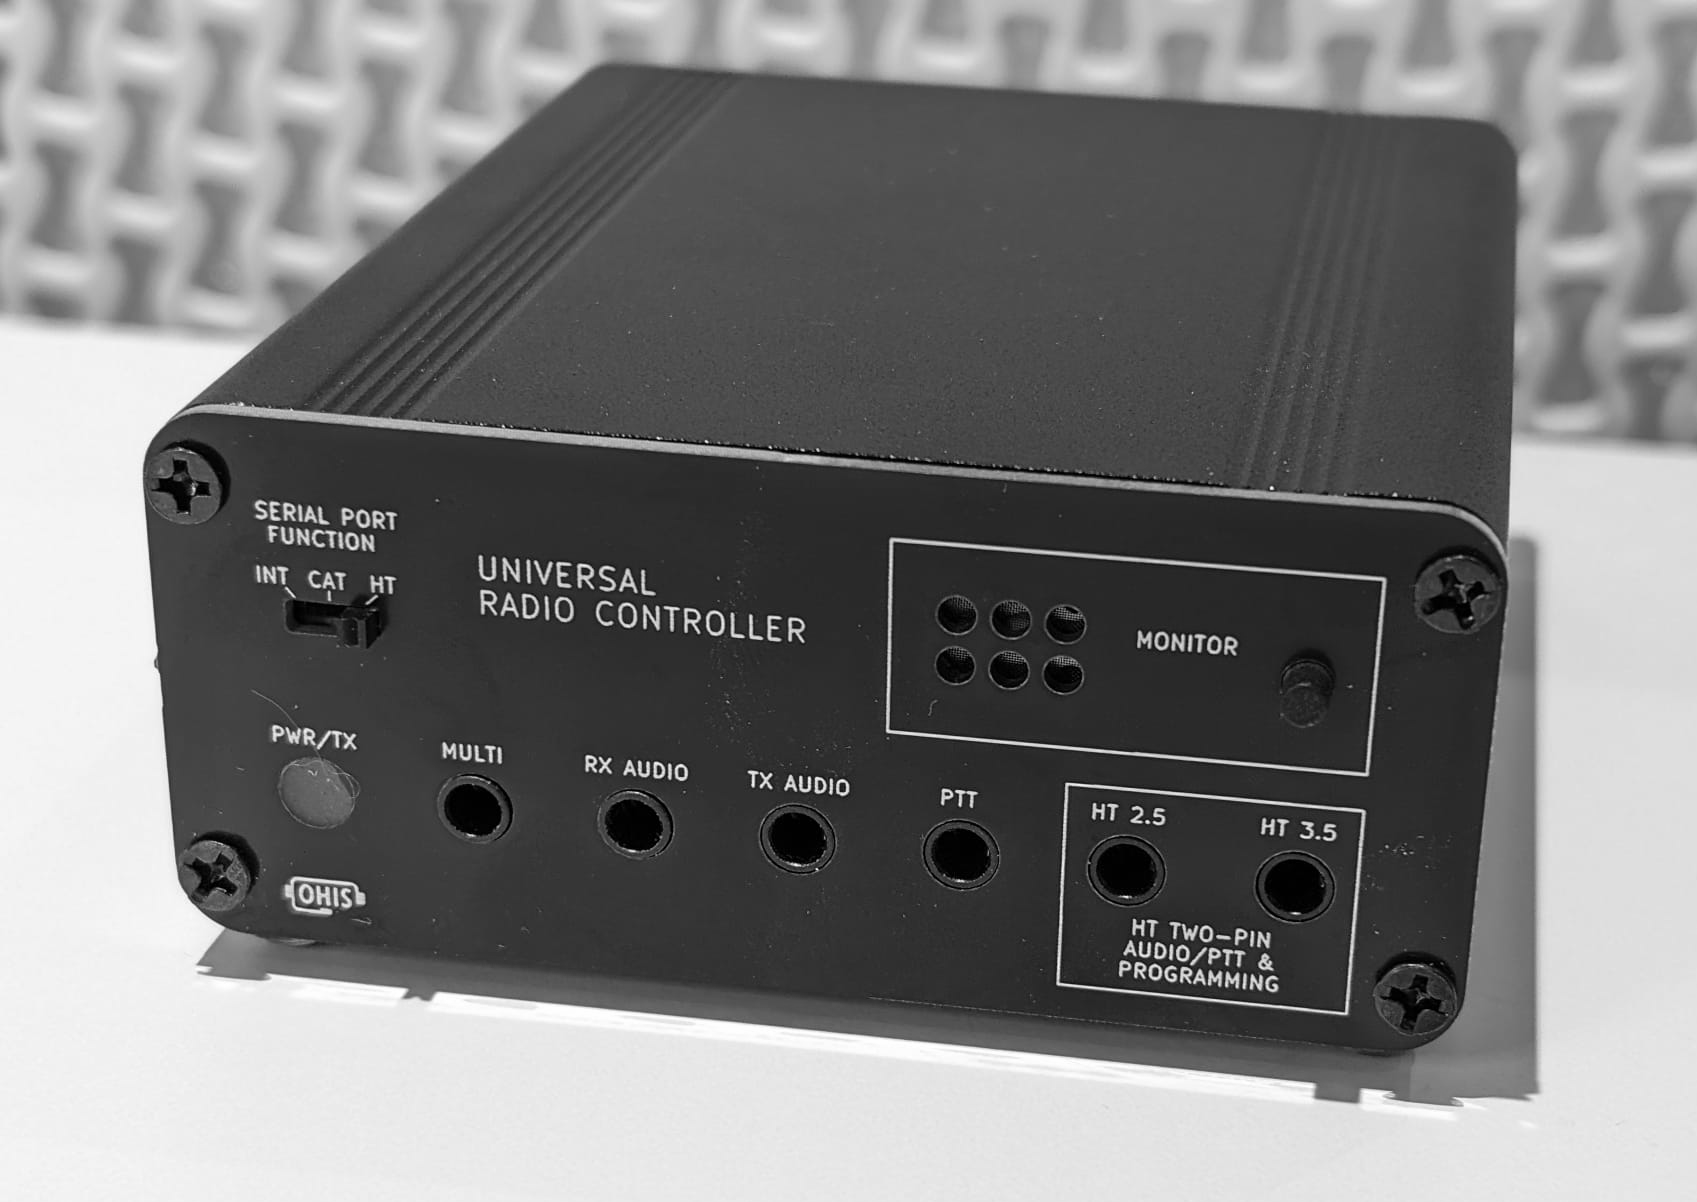 What is the Universal Radio Controller?